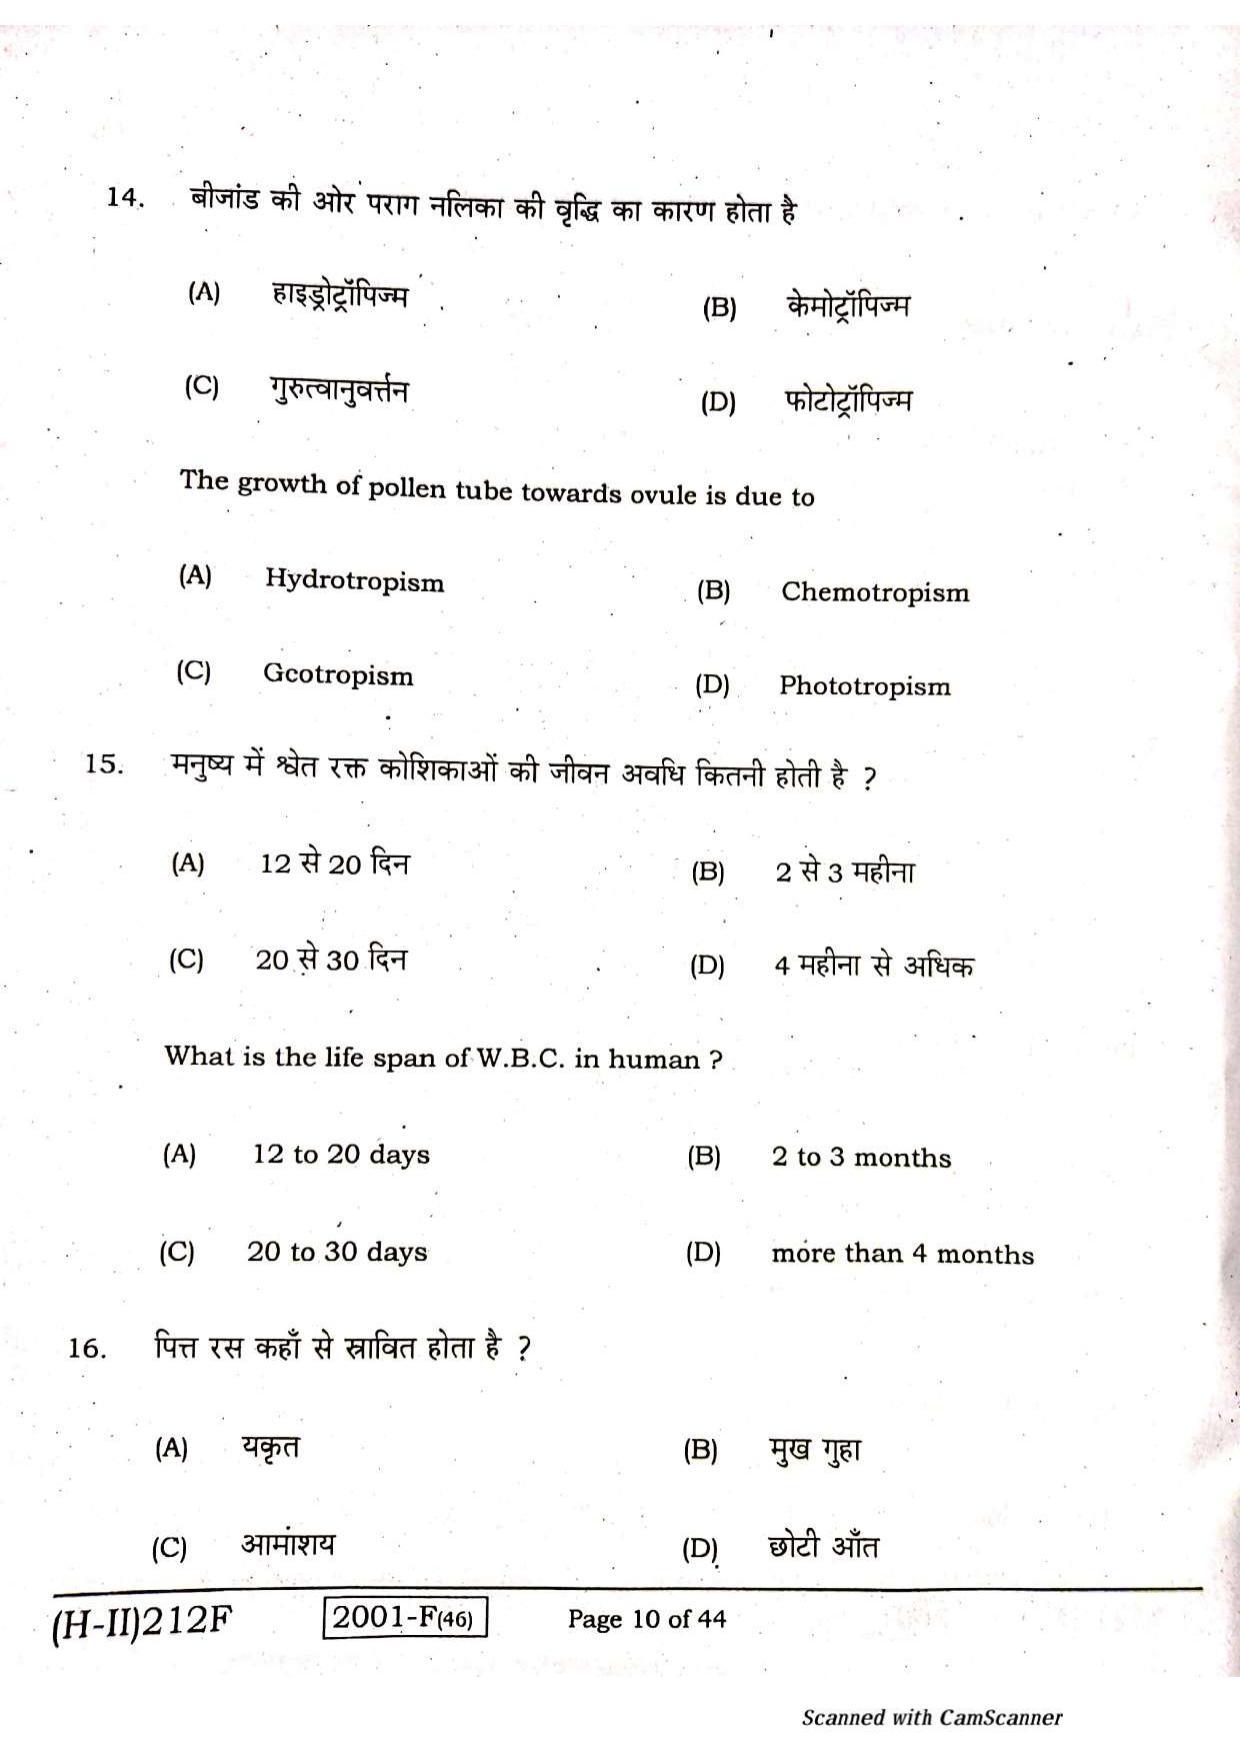 Bihar Board Class 10 Science 2021 (2nd Sitting) Question Paper - Page 8